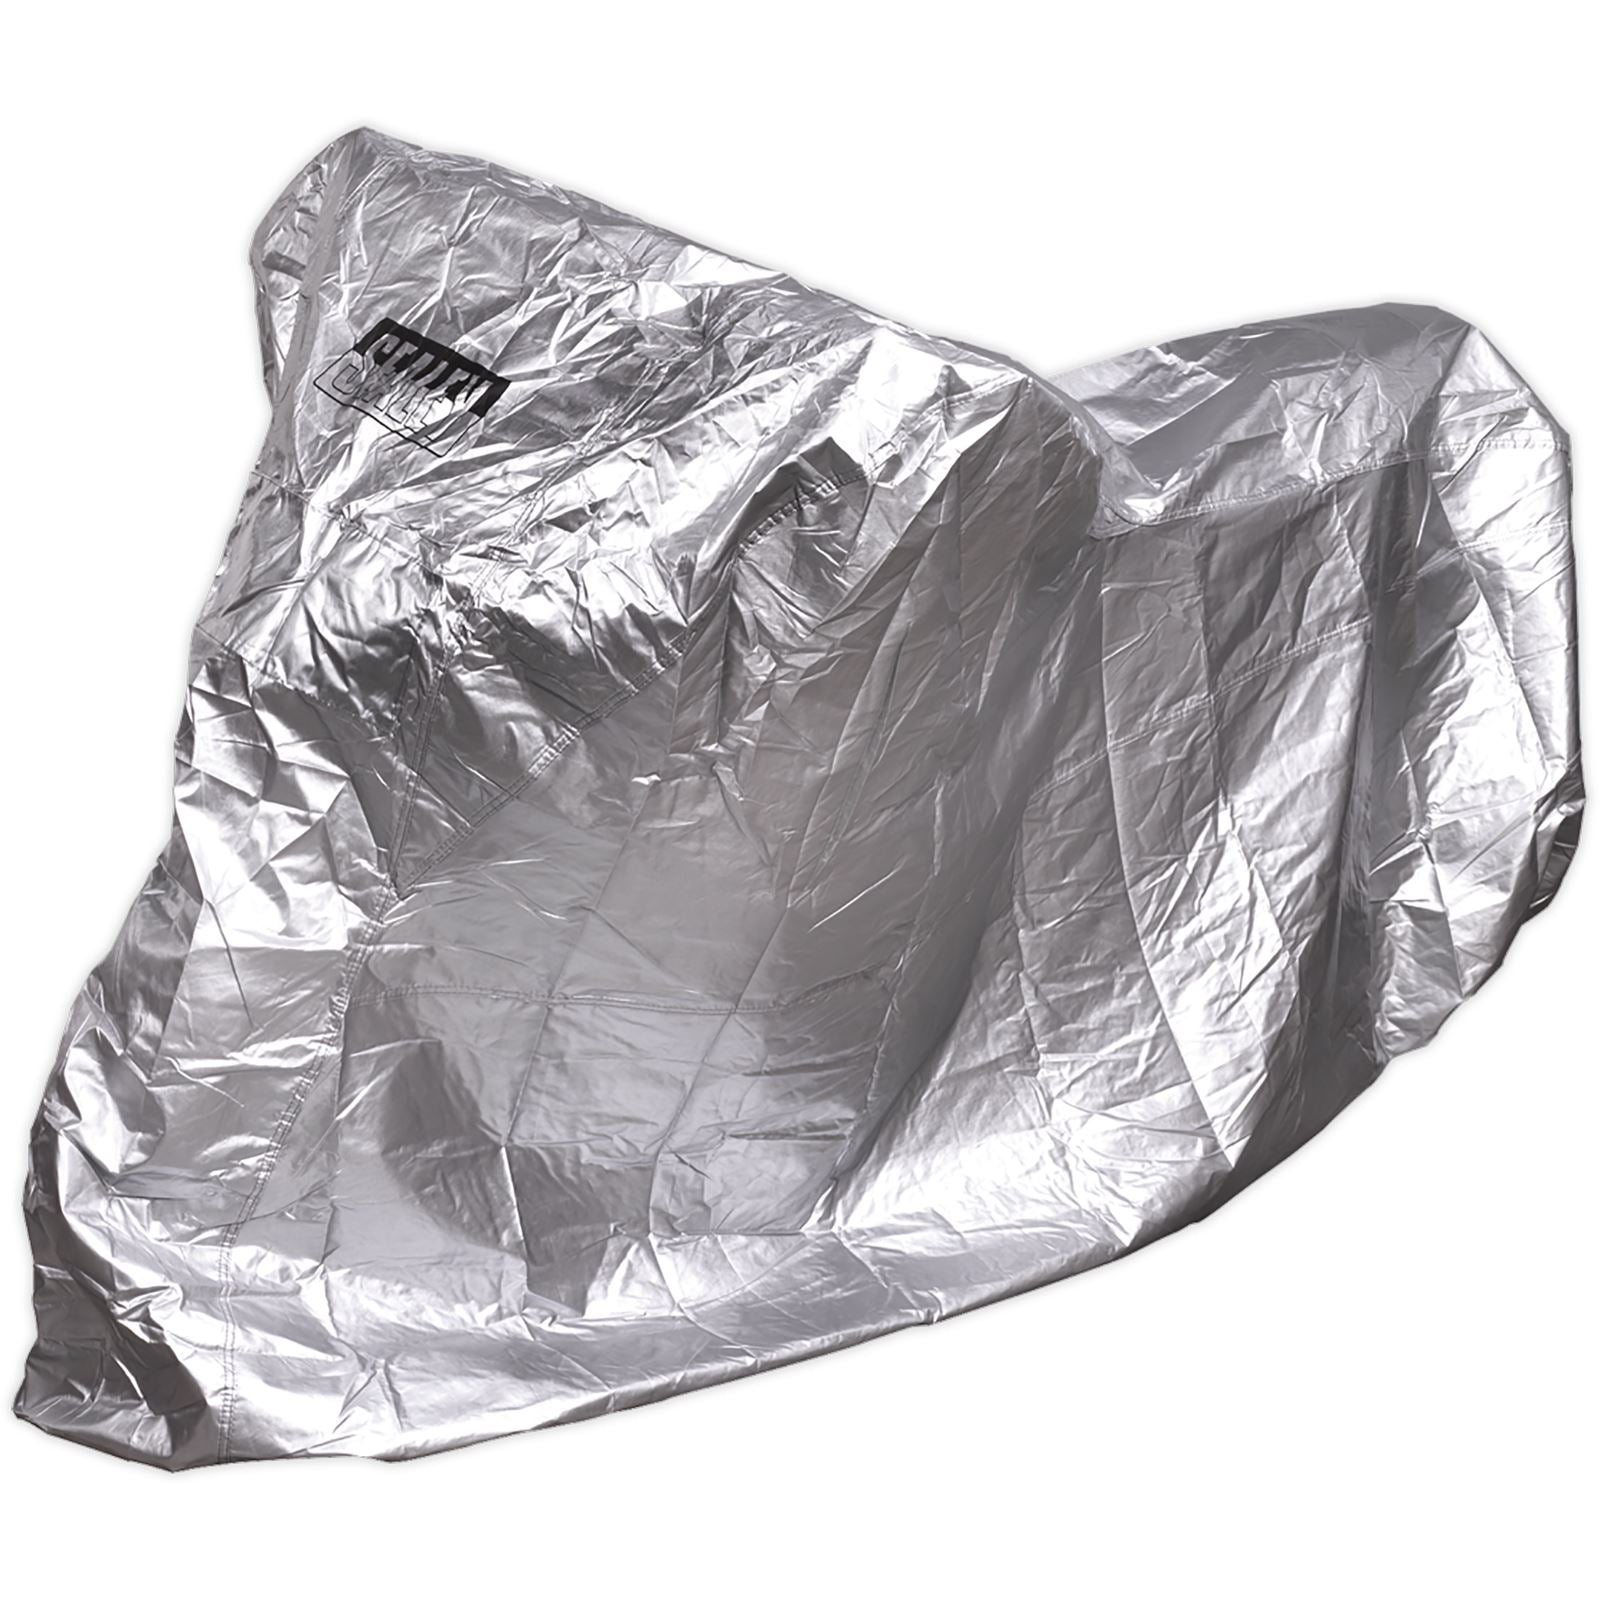 Sealey Motorcycle Cover 2320 x 1000 x 1350mm - Medium